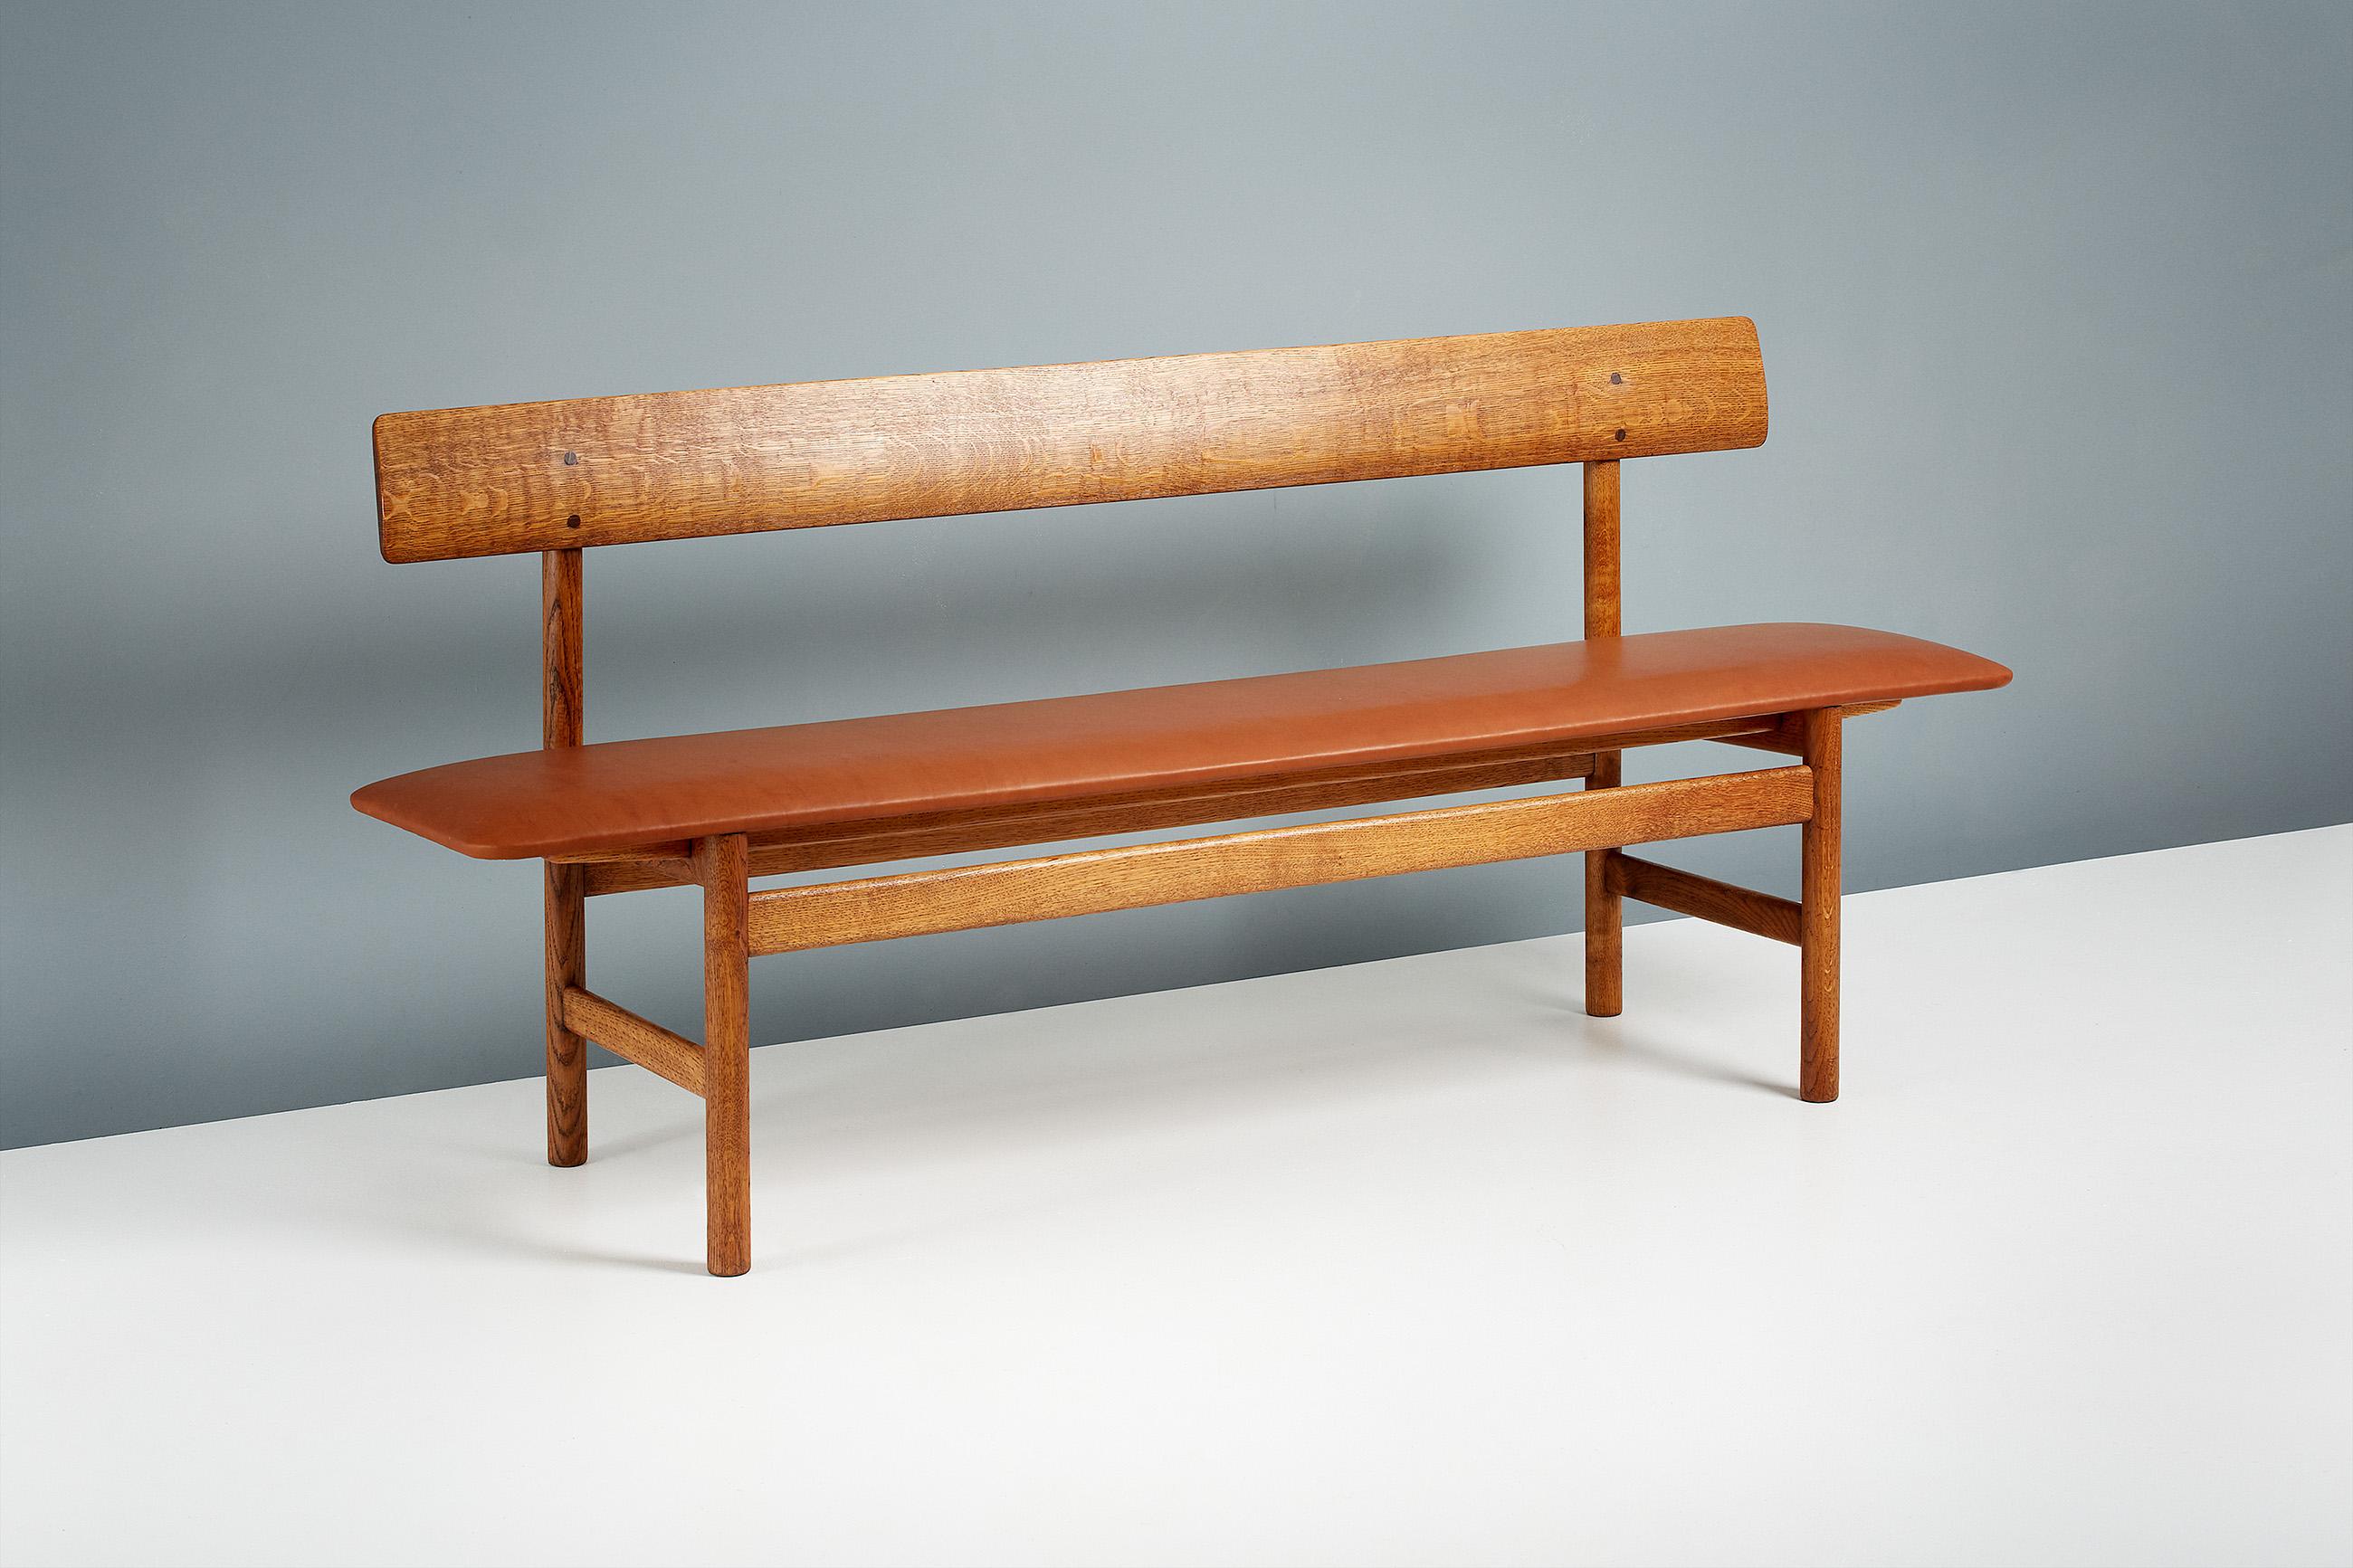 Model 3171 bench designed by master-designer Borge Mogensen with frame made from solid oak. The seat has been reupholstered with nw cognac brown aniline leather. Designed 1956 the Model 3171 was produced by Fredericia Furniture. 

Measures: Height